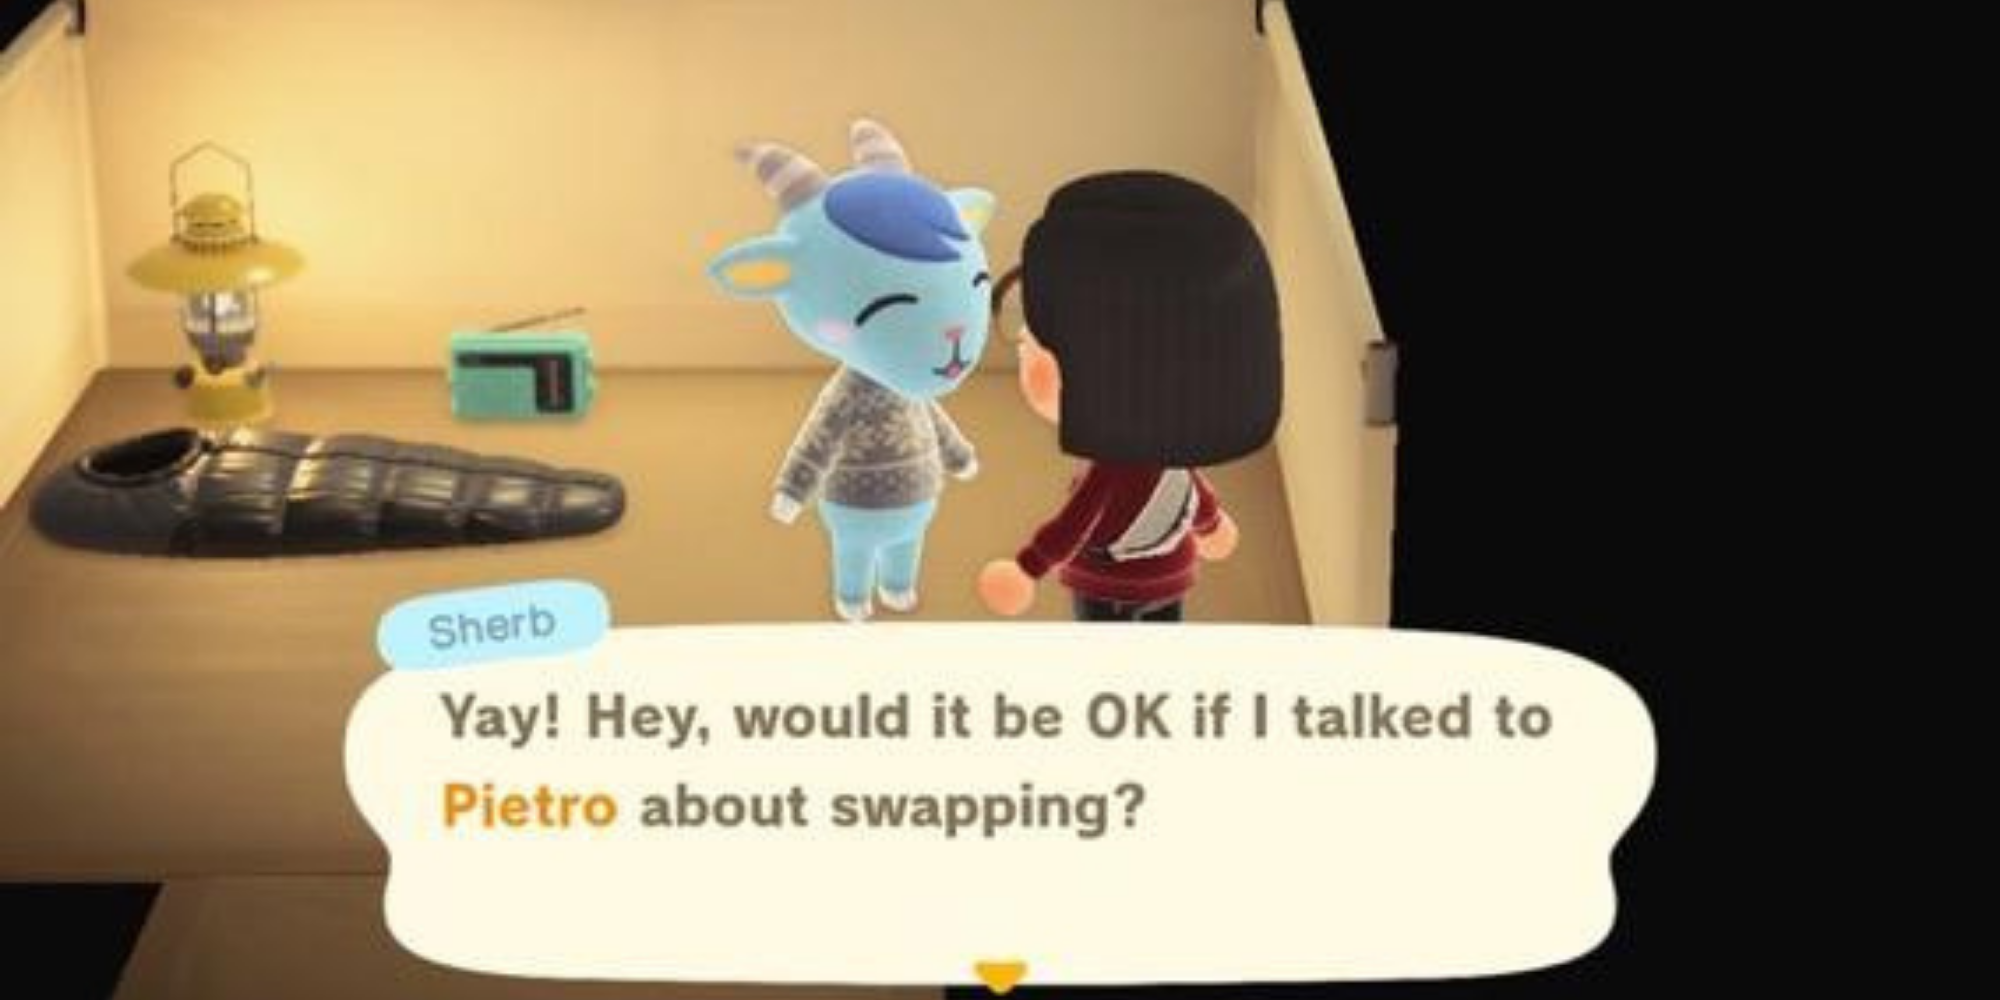 Animal Crossing New Horizons Player talking to Camper about swapping with another villager